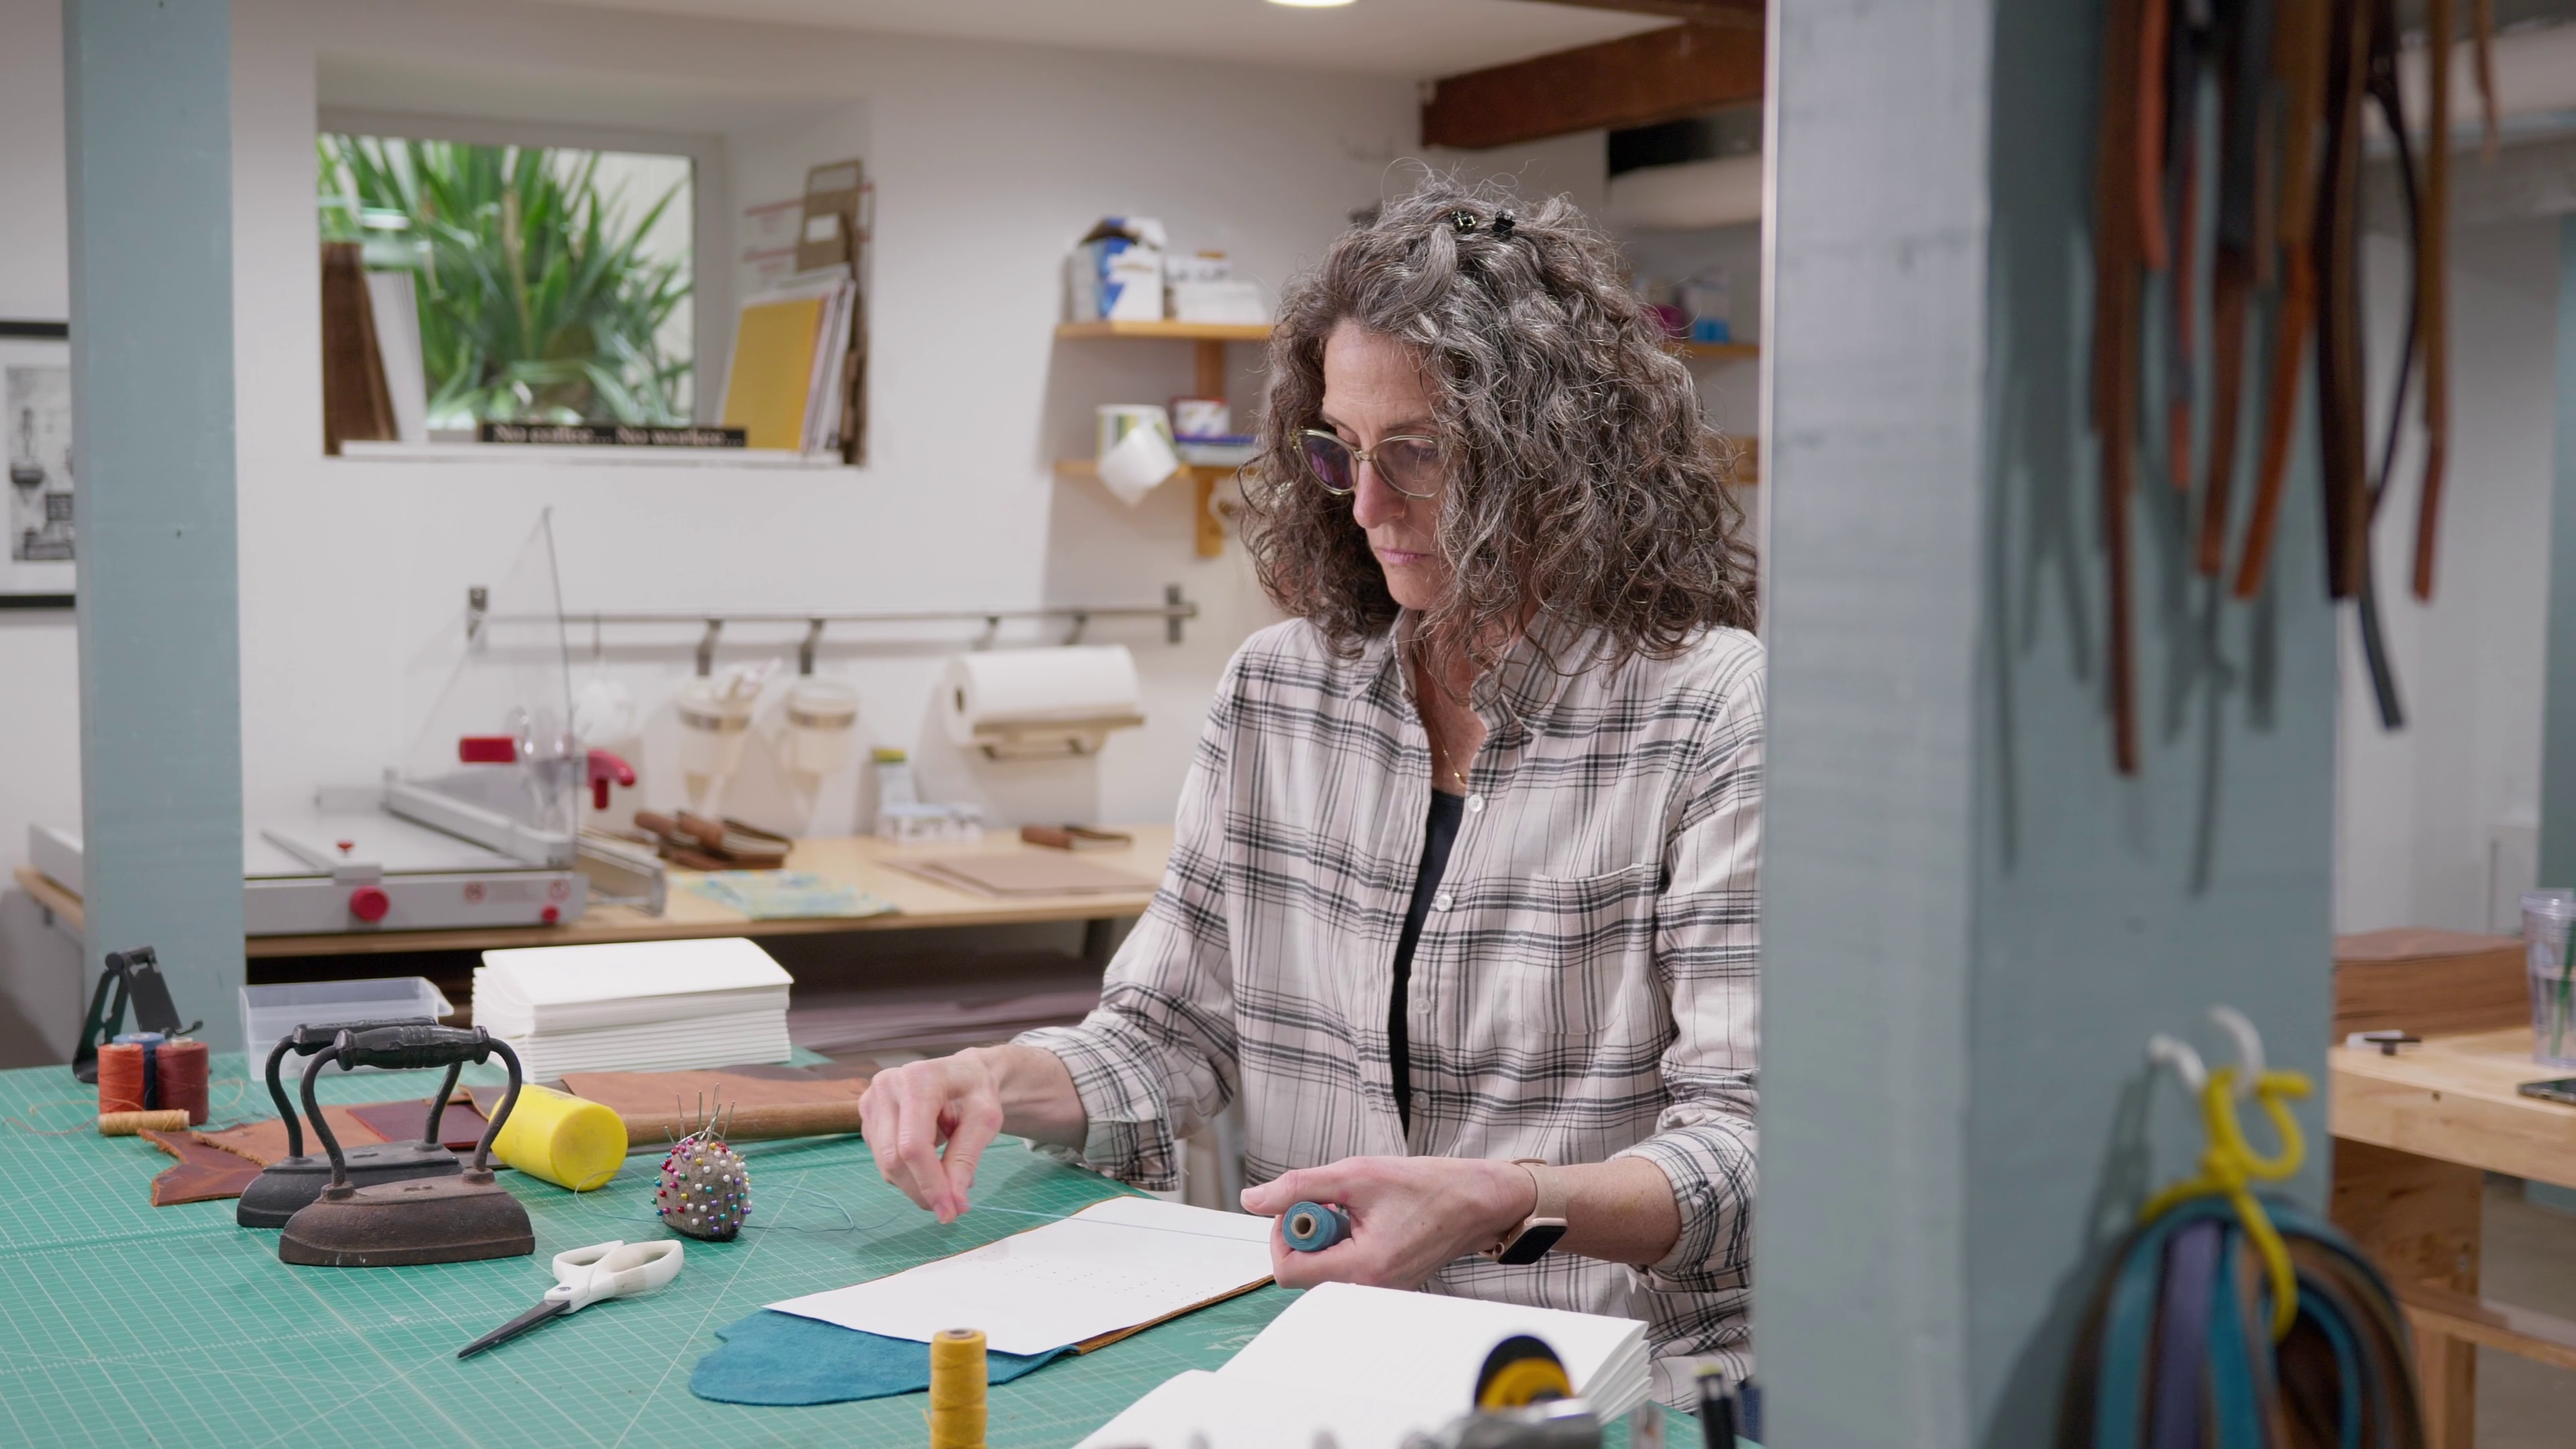 Load video: Kris Stewart in her studio making a leather journal step by step